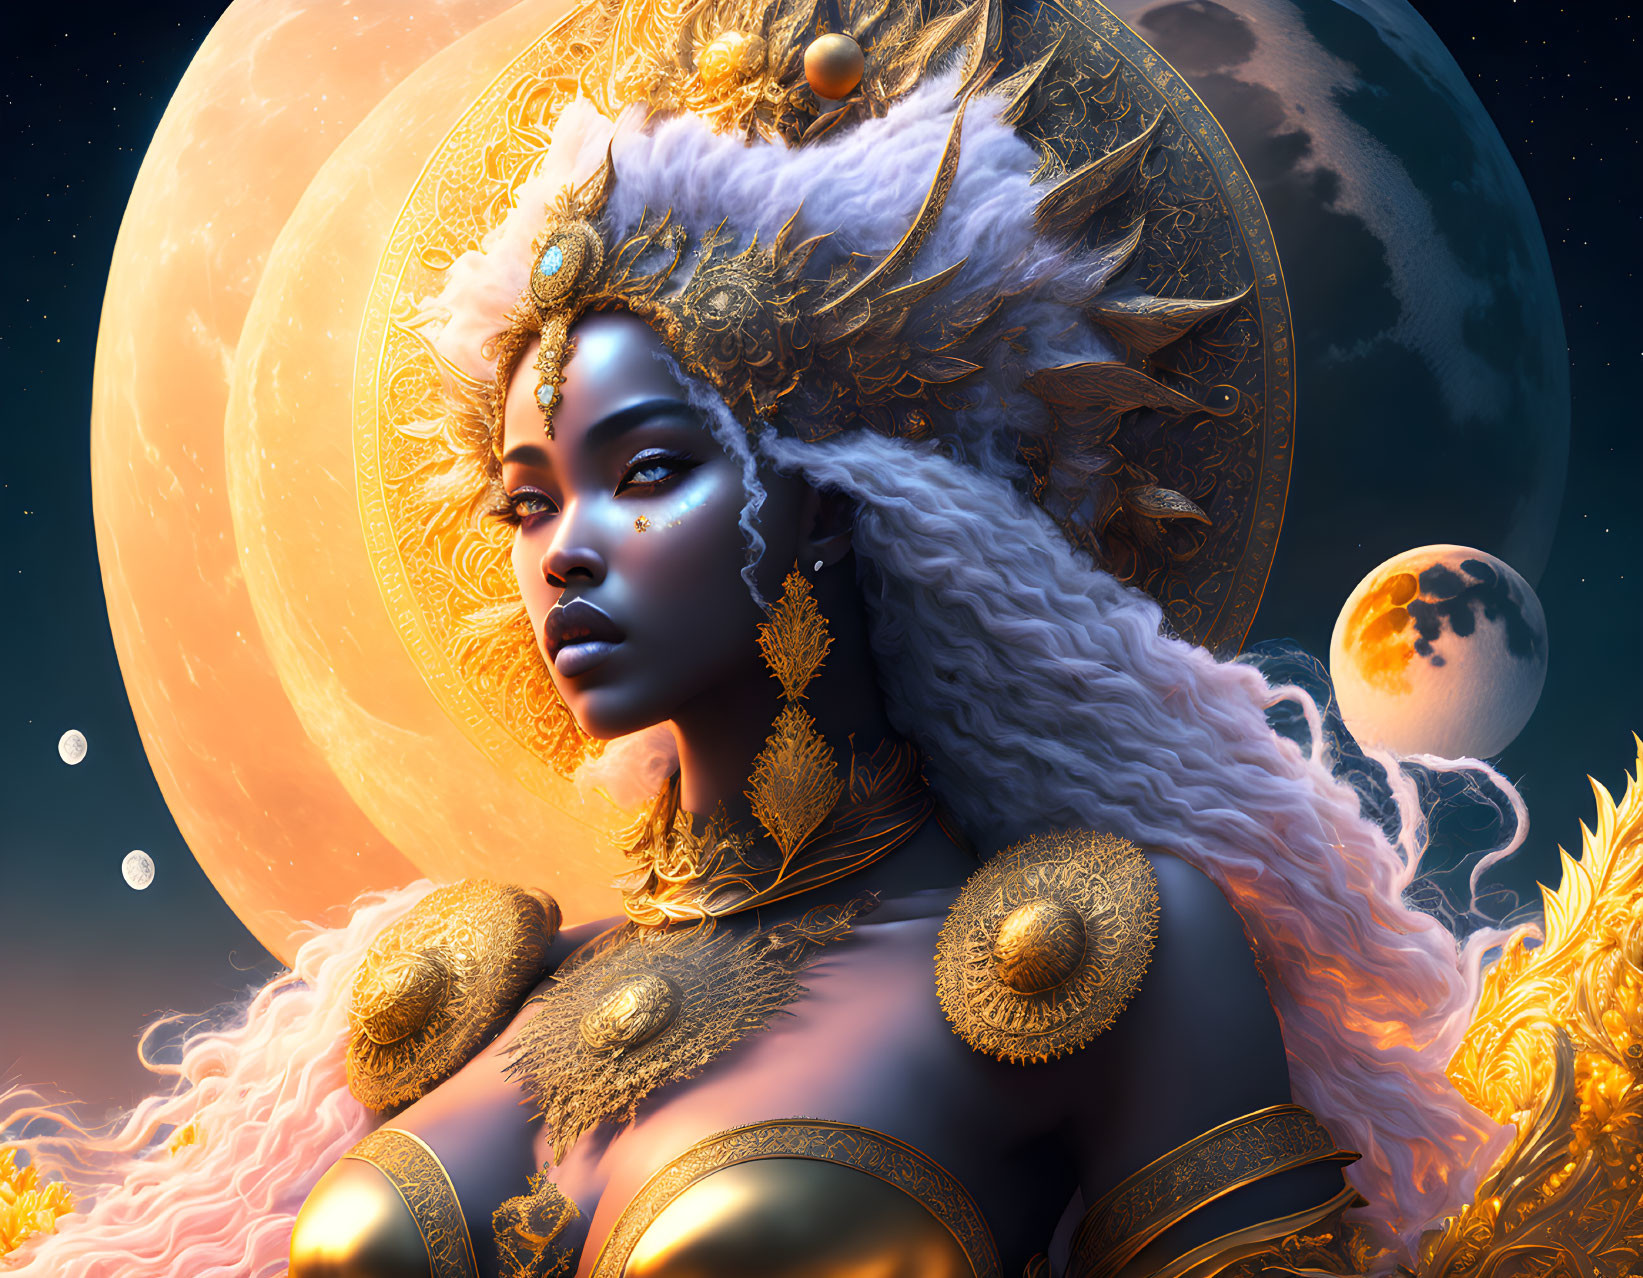 Golden-armored figure in cosmic setting with celestial bodies.